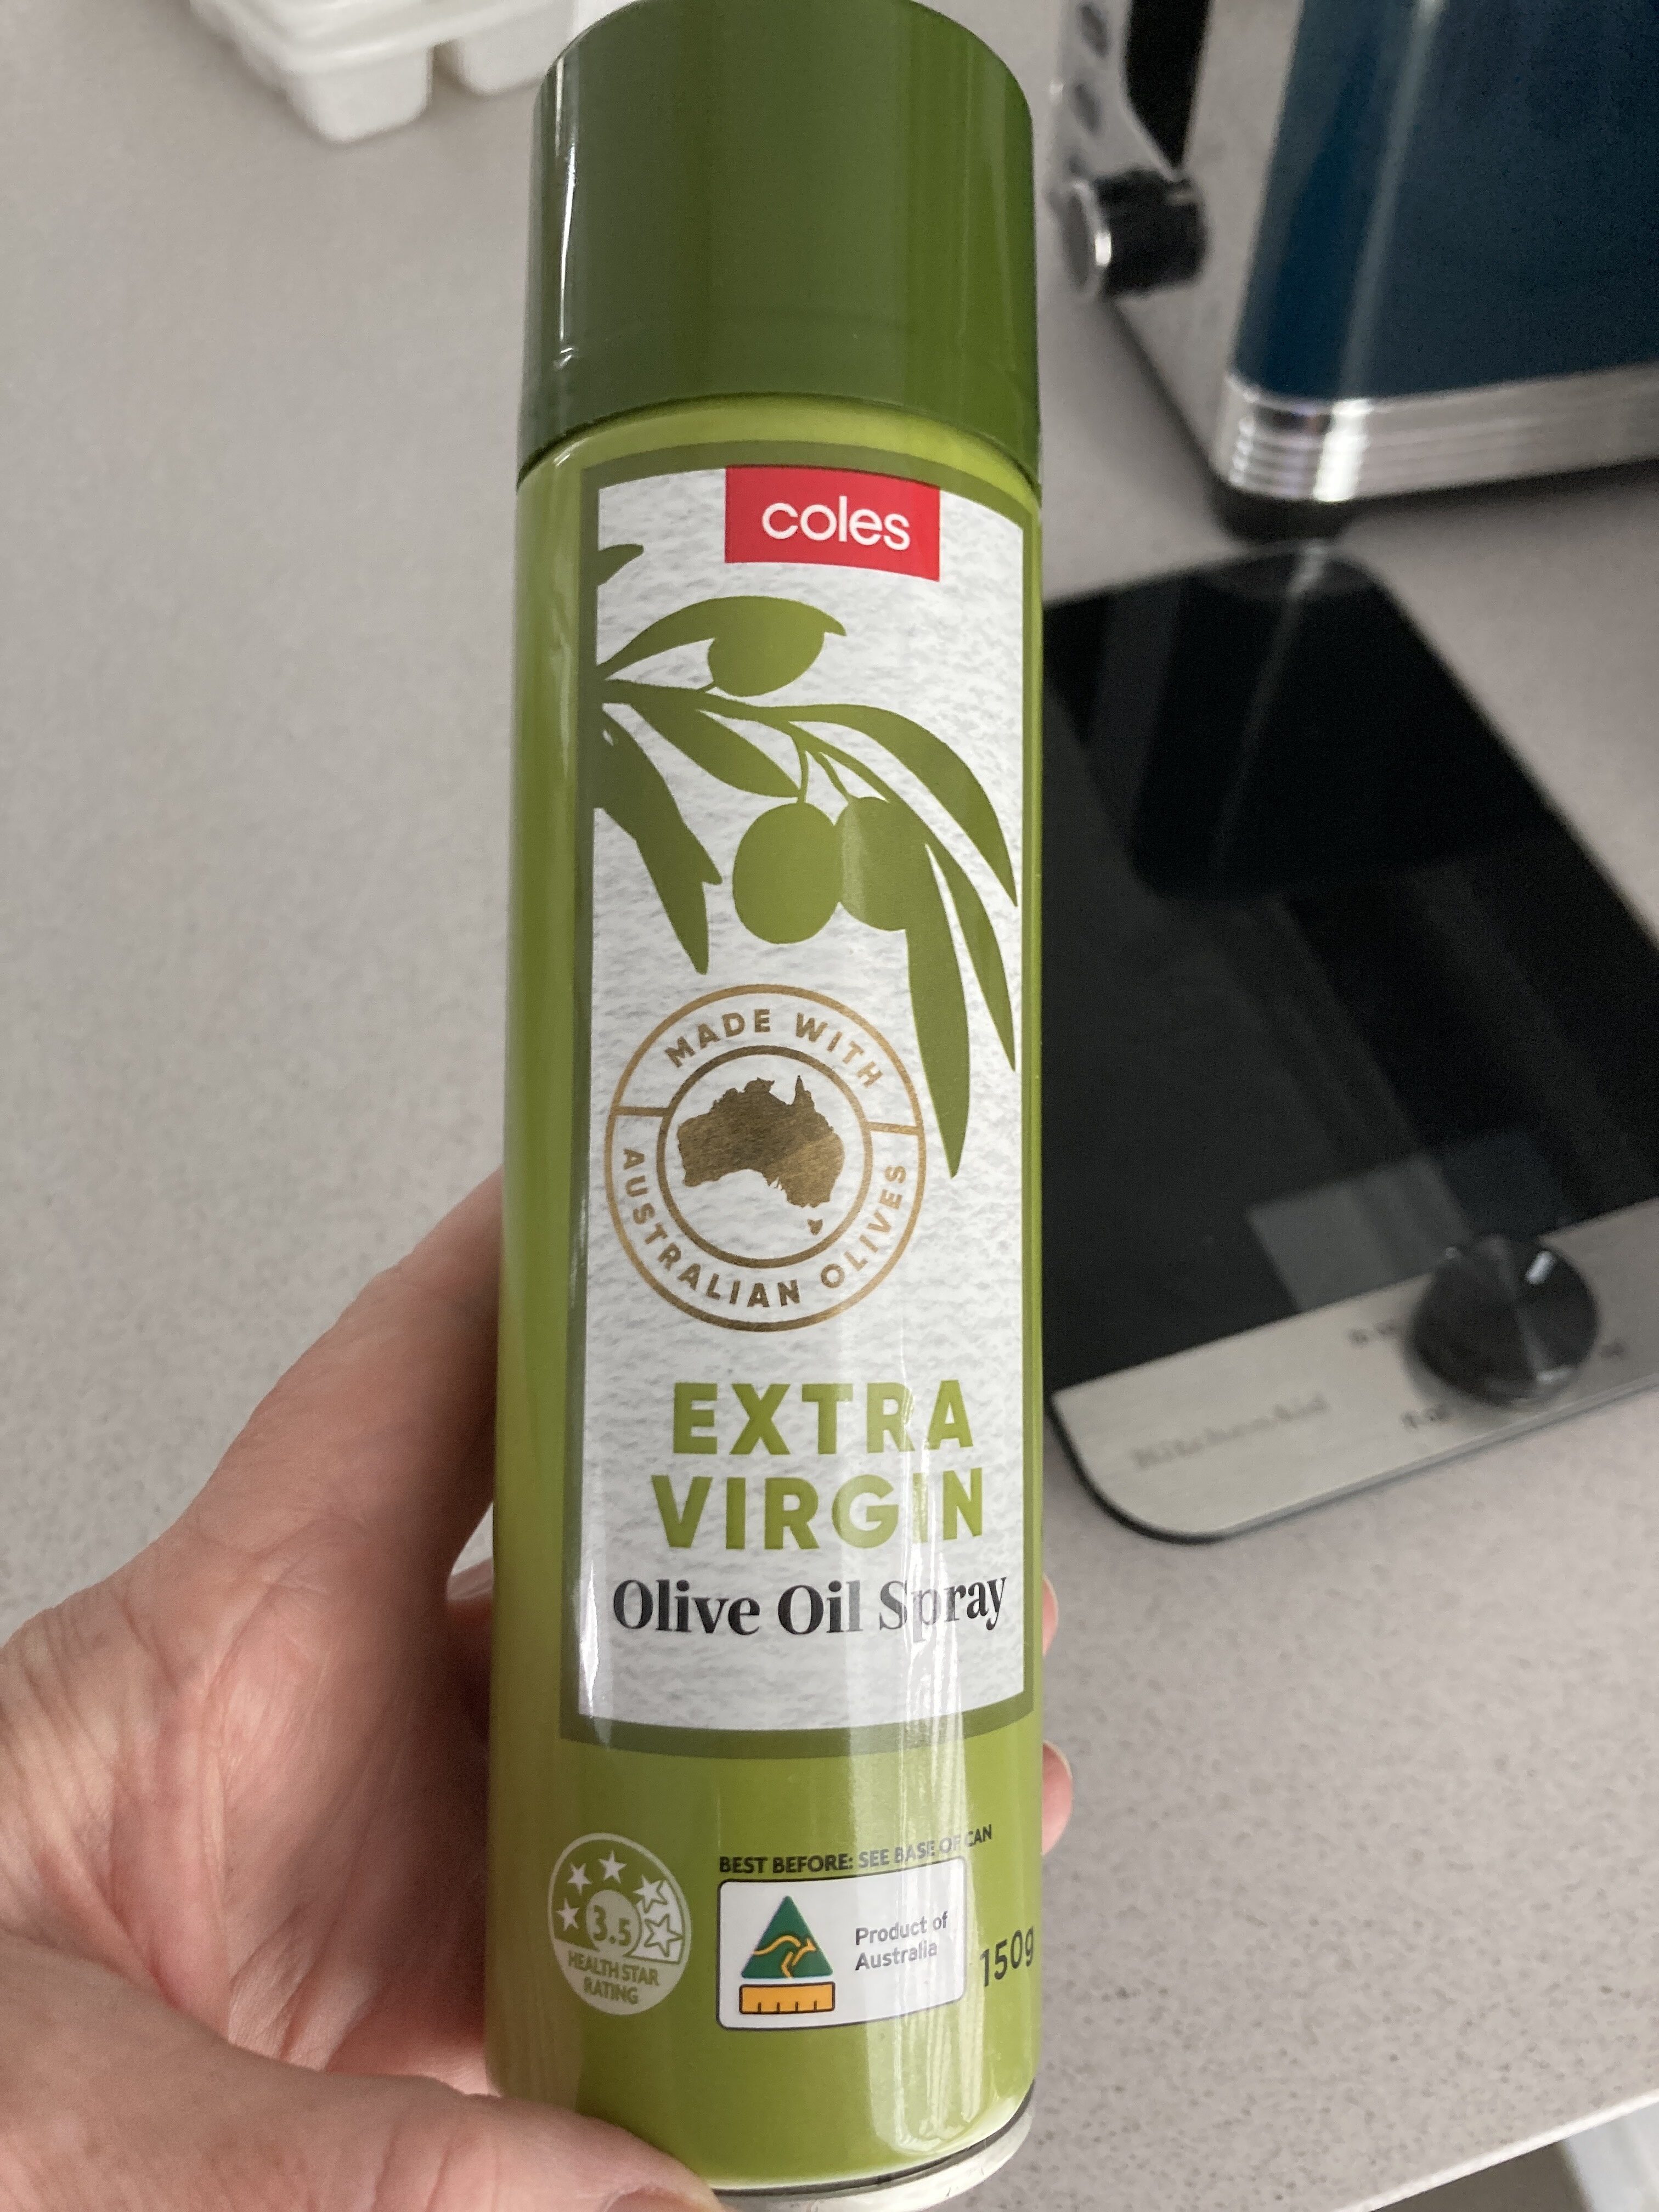 Extra Virgin Olive Oil Spray - Product